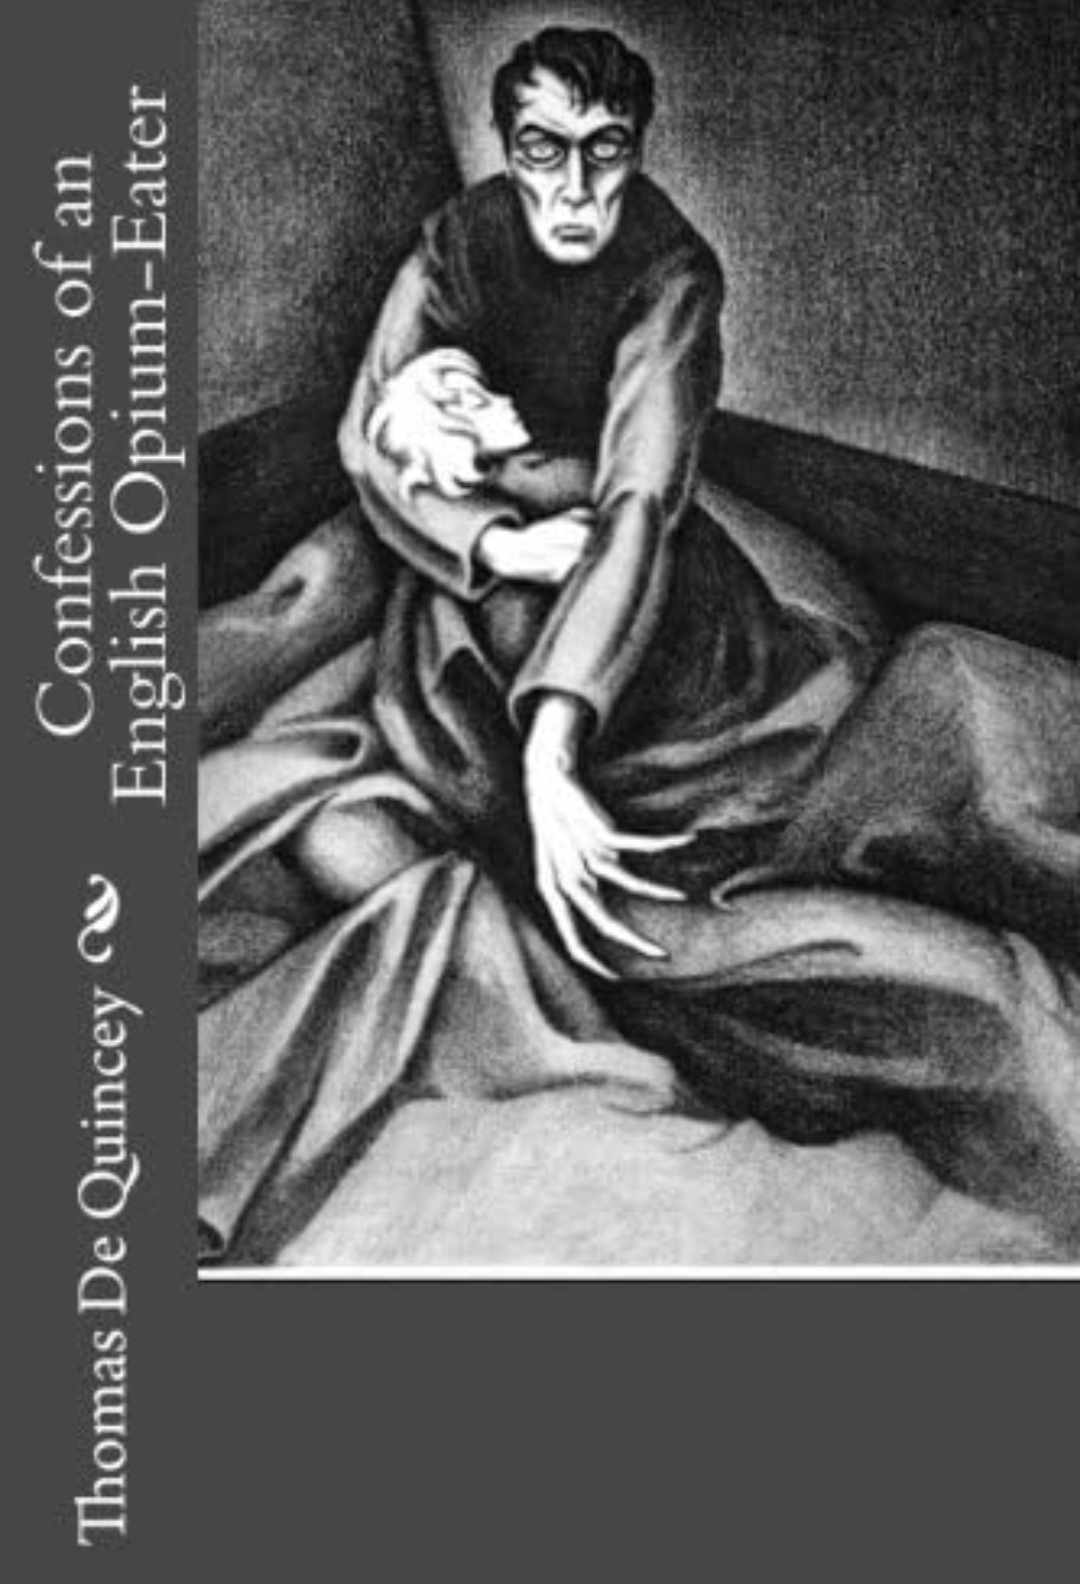 Confessions of an English Opium Eater by Thomas De Quincey